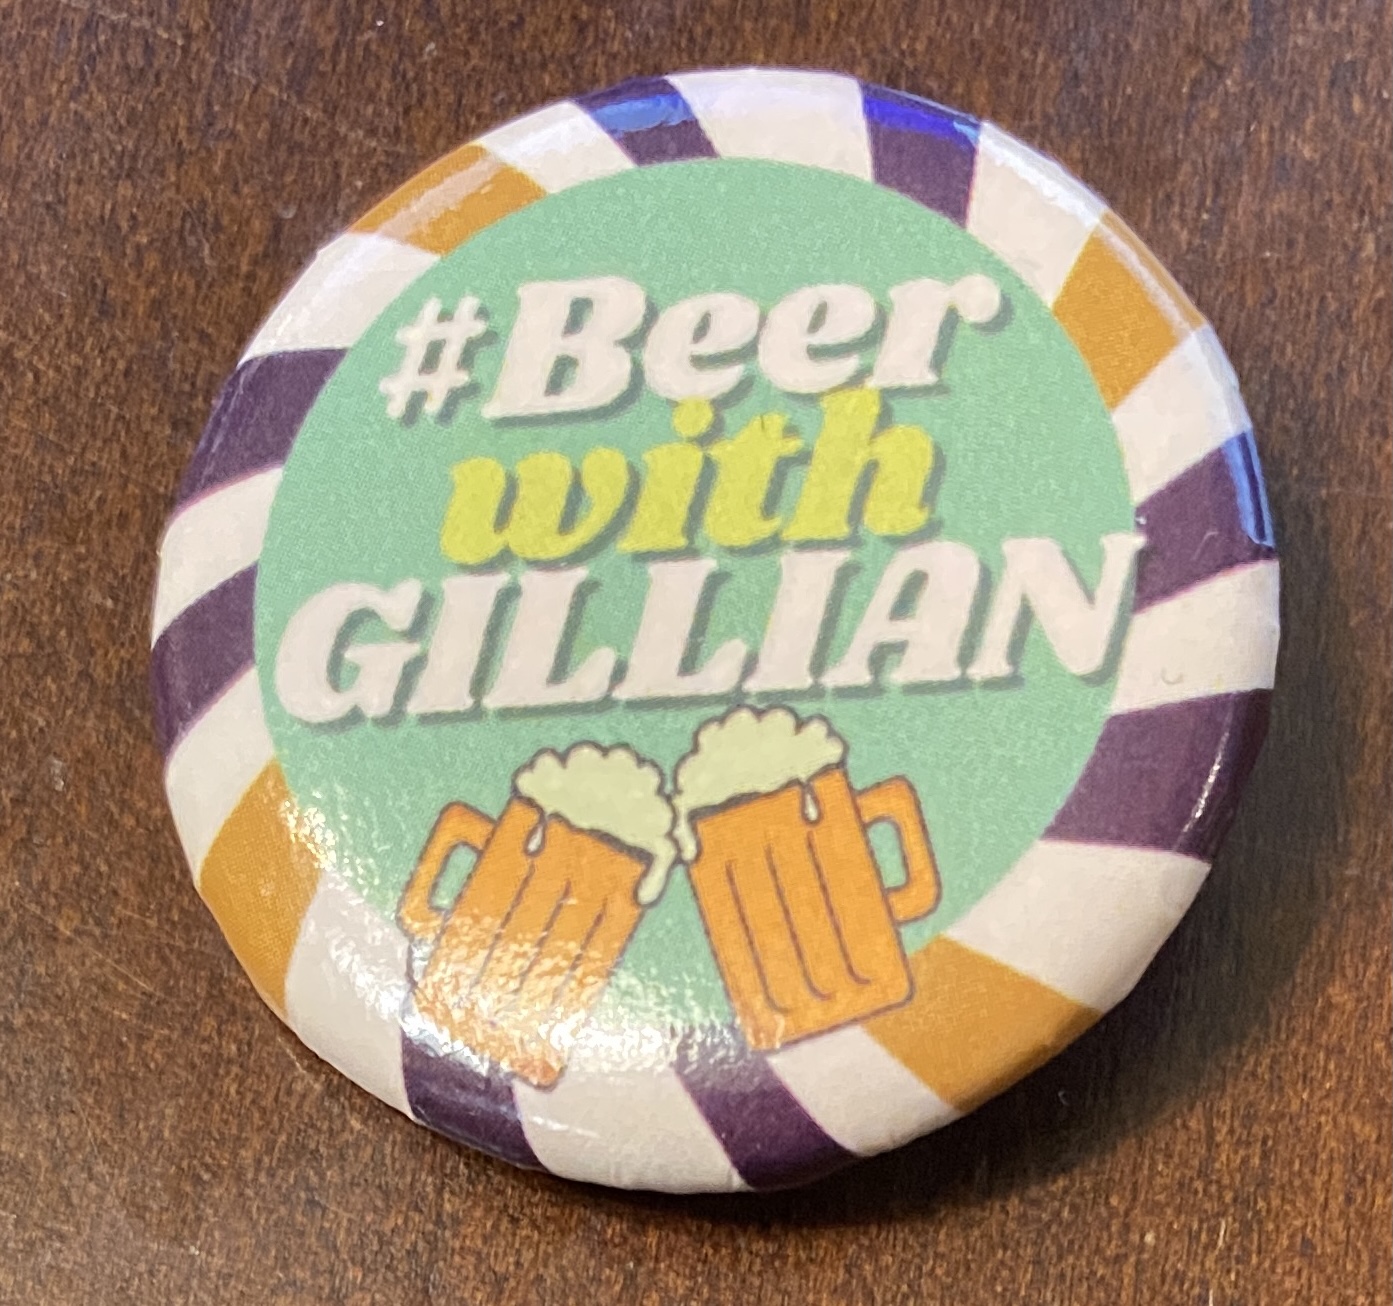 Beer With Gillian